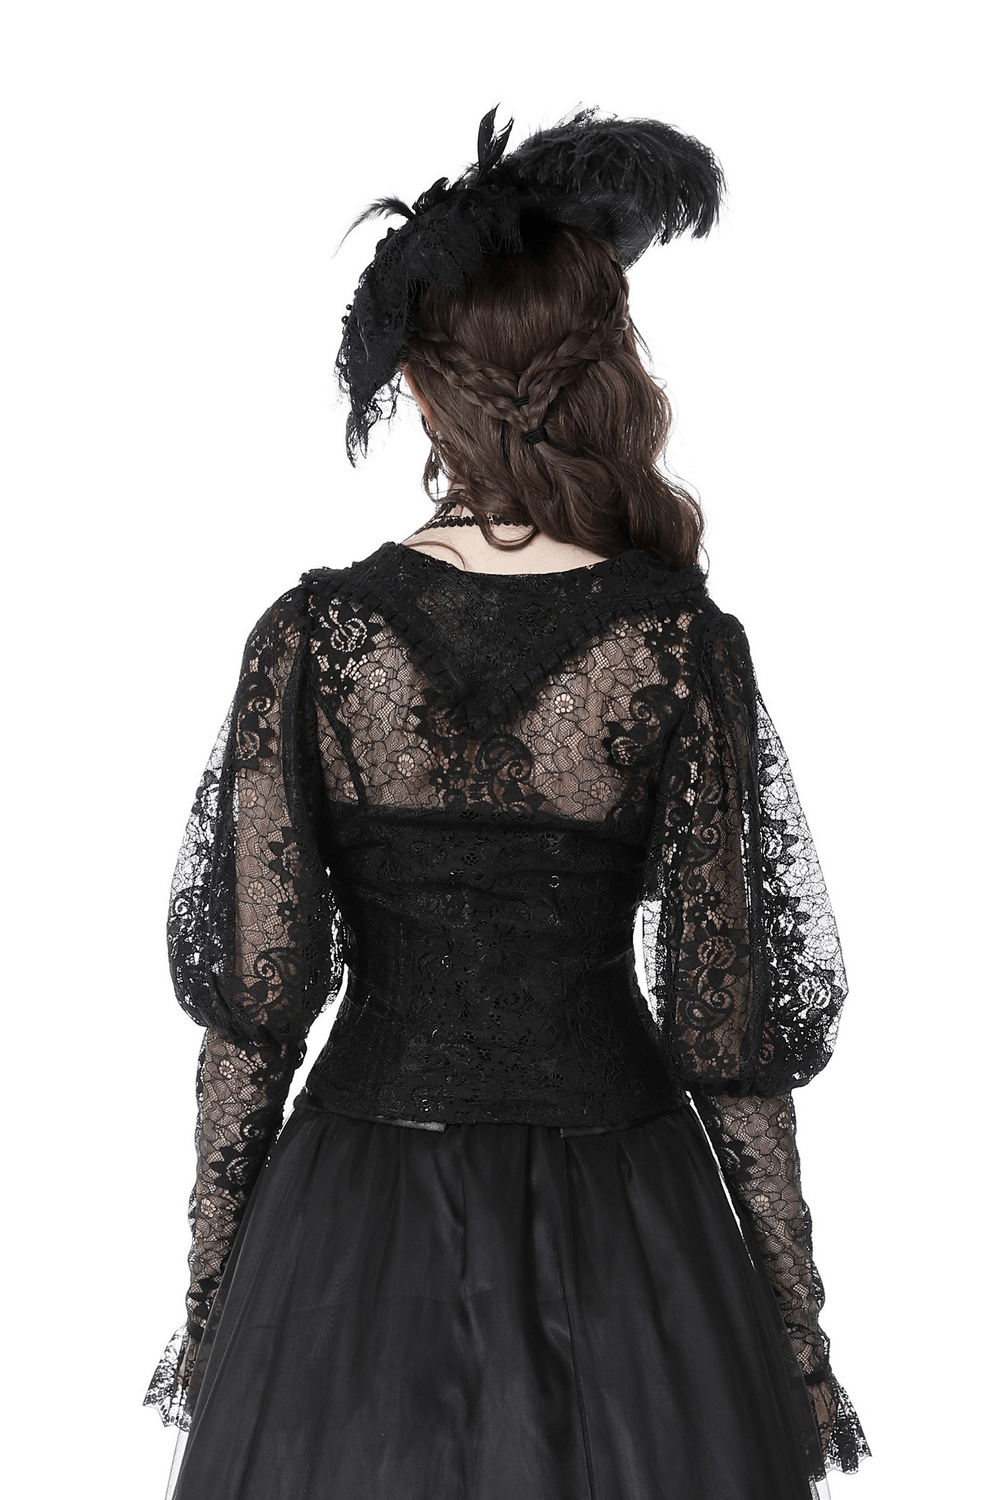 Dark Floral Lace Top Bell Sleeves Goth Romantic Blouse